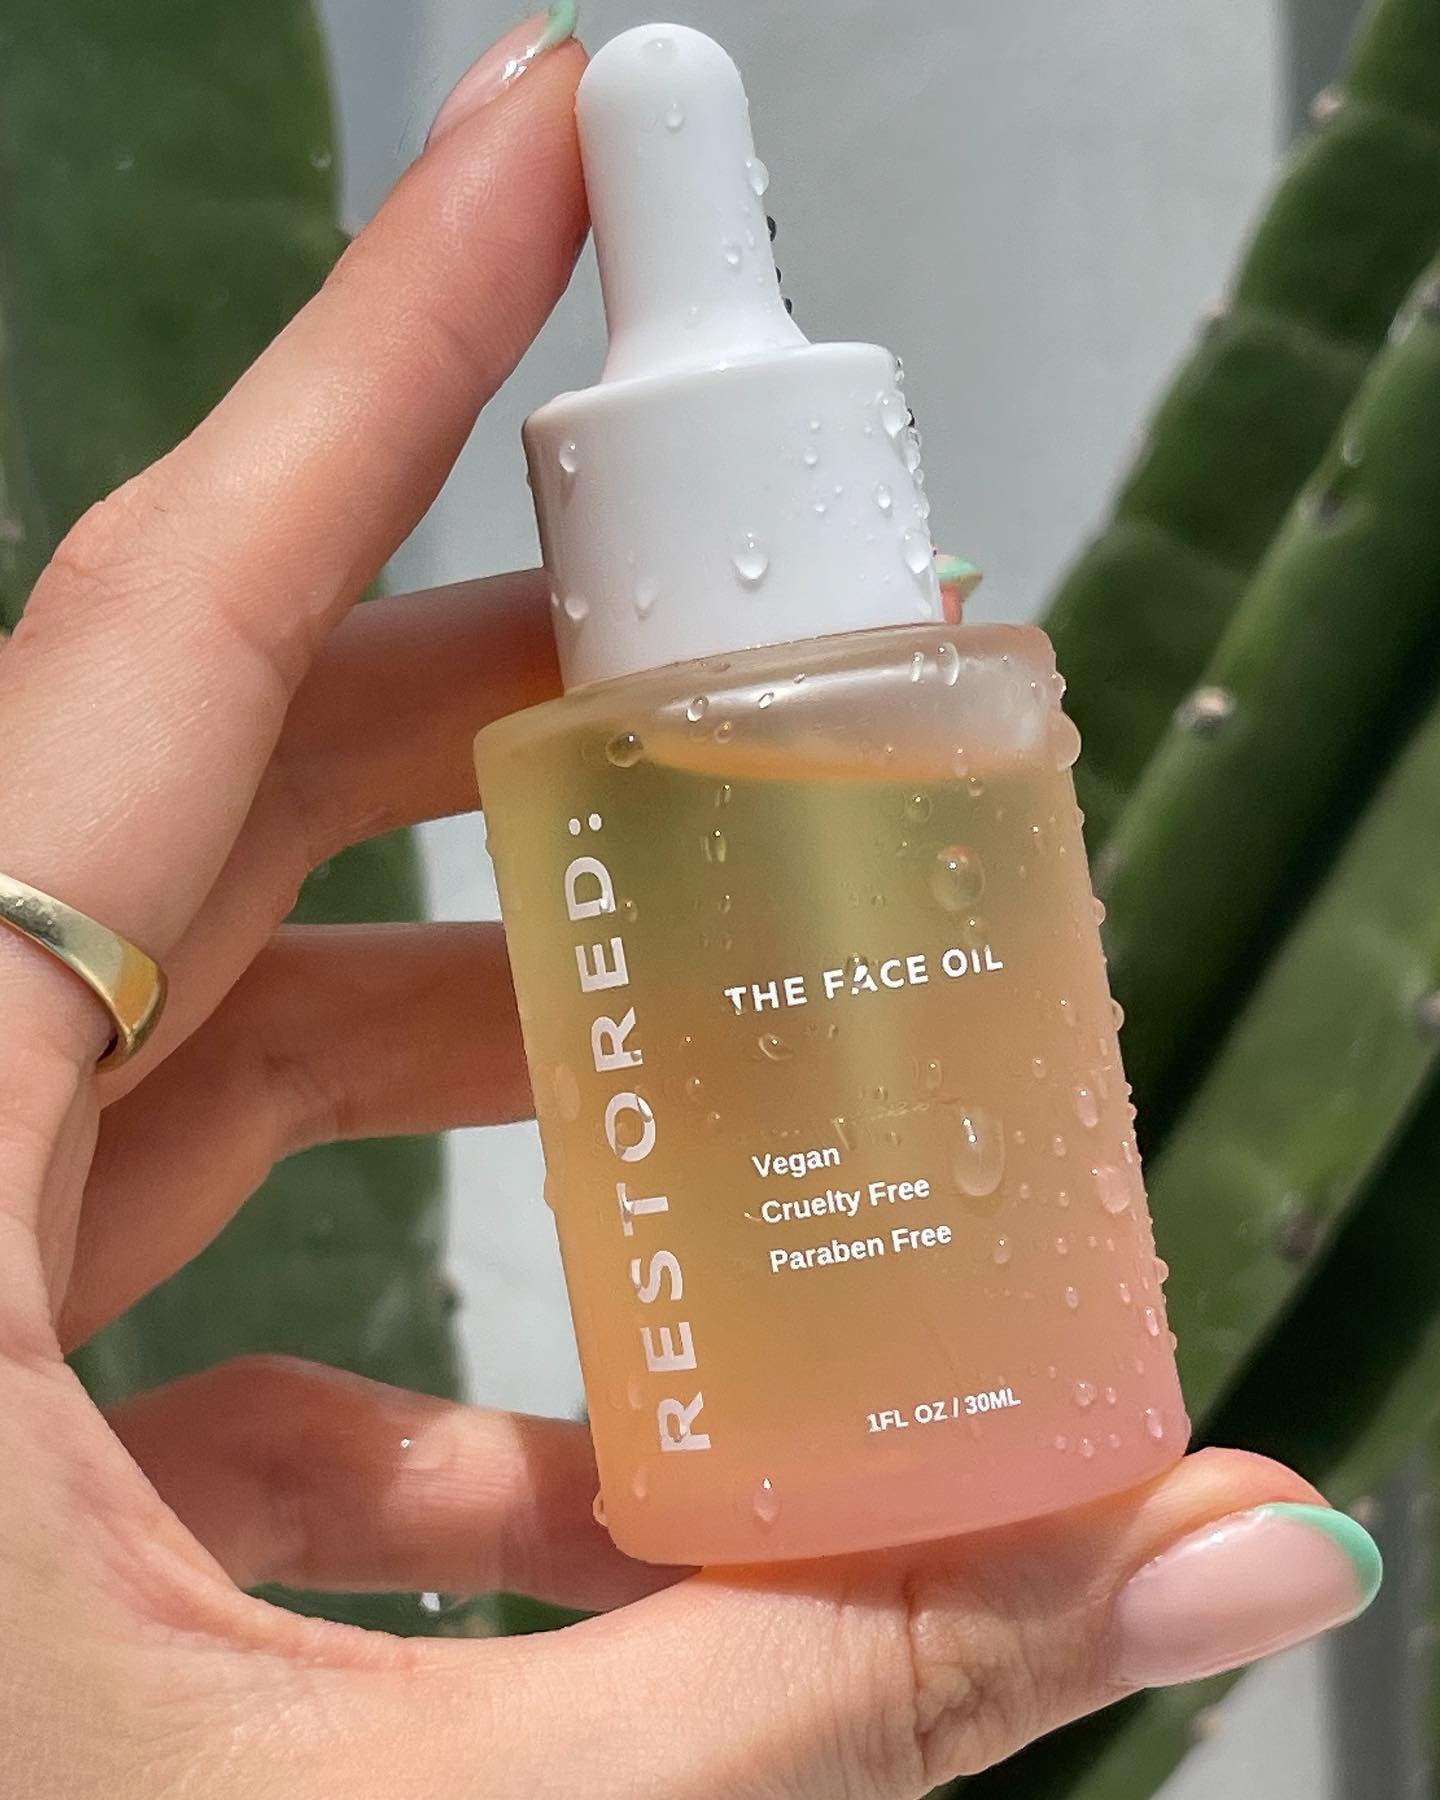 Did you know all of our face oil ingredients are cold pressed?
= more nutrients for your skin. ✨

Shop now at restoredskincare.co.uk